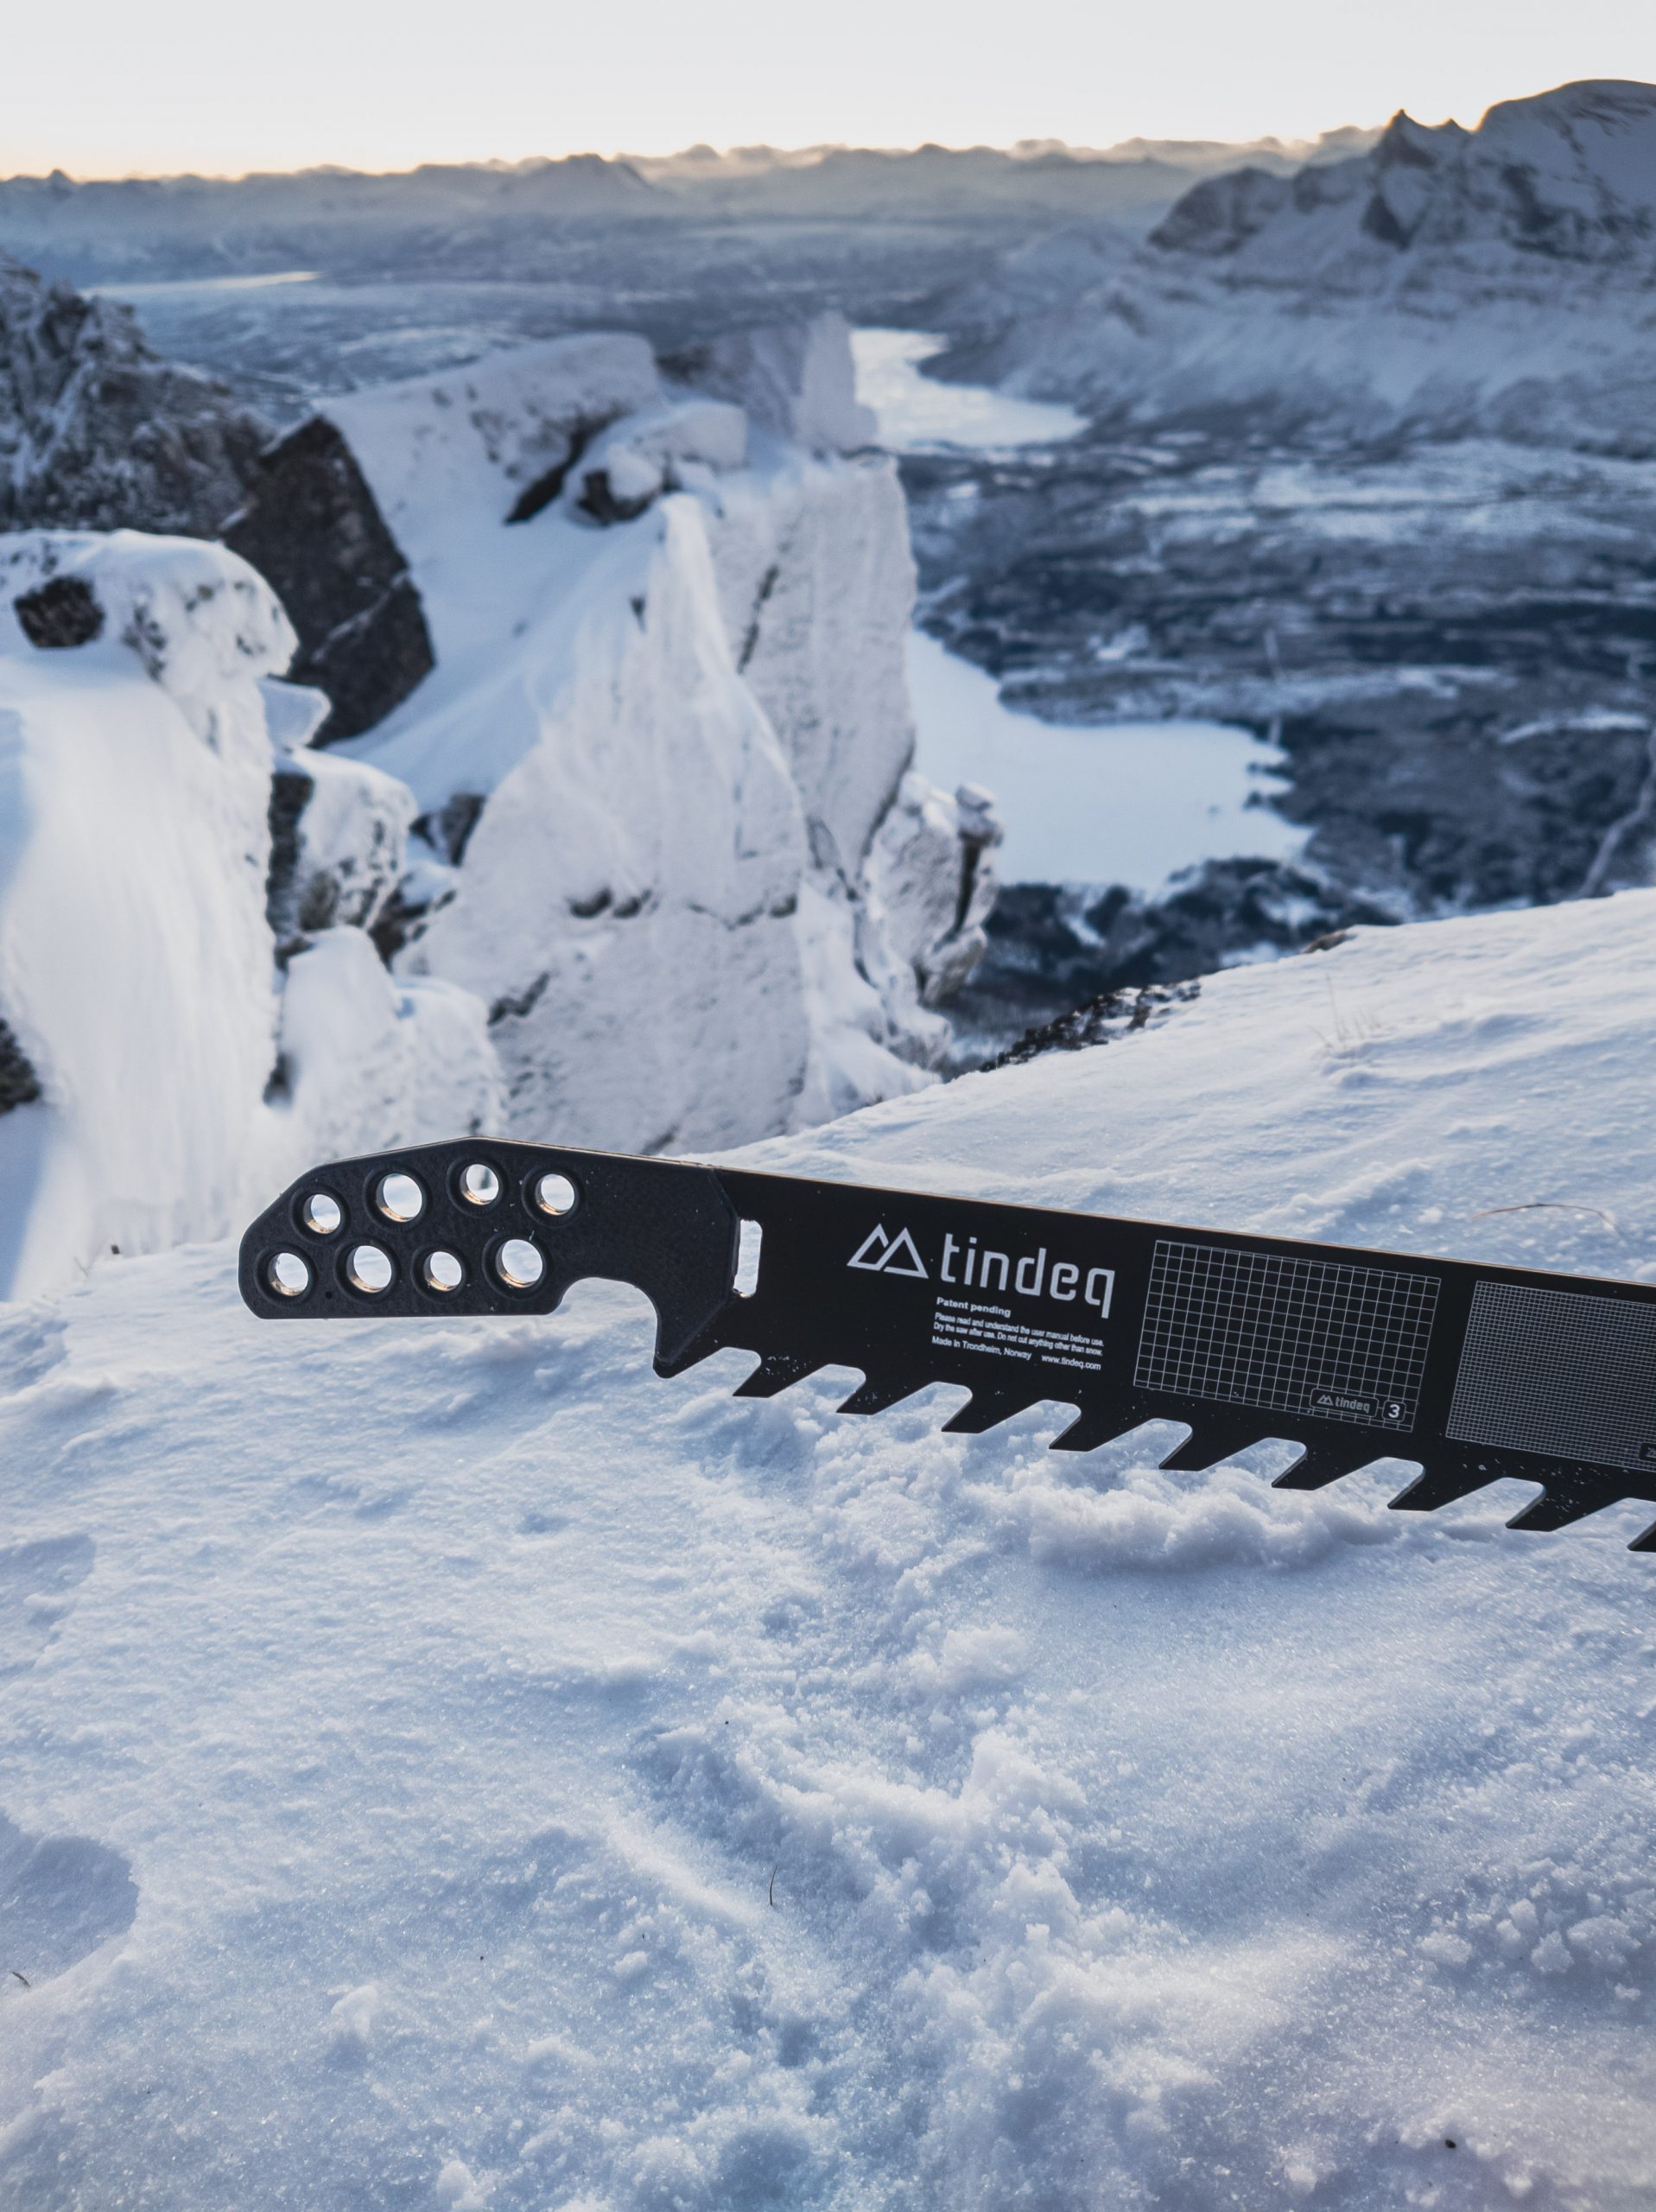 Paul Forward reviews the Tindeq Snow Saw for BLISTER.